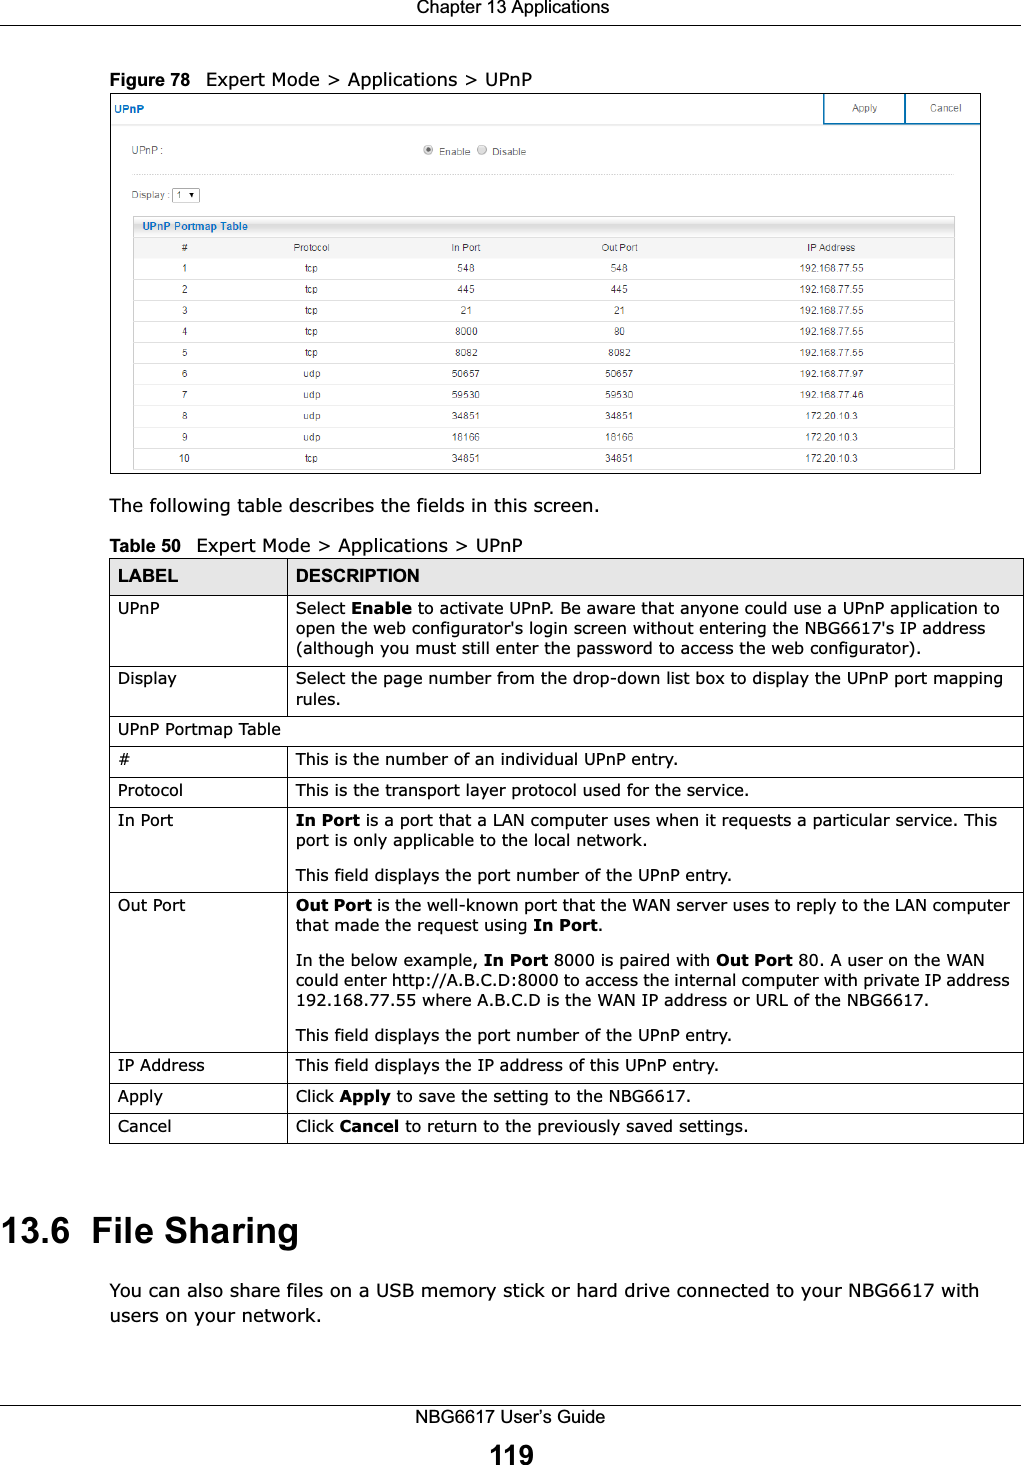  Chapter 13 ApplicationsNBG6617 User’s Guide119Figure 78   Expert Mode &gt; Applications &gt; UPnPThe following table describes the fields in this screen.13.6  File SharingYou can also share files on a USB memory stick or hard drive connected to your NBG6617 with users on your network. Table 50   Expert Mode &gt; Applications &gt; UPnPLABEL DESCRIPTIONUPnP Select Enable to activate UPnP. Be aware that anyone could use a UPnP application to open the web configurator&apos;s login screen without entering the NBG6617&apos;s IP address (although you must still enter the password to access the web configurator).Display Select the page number from the drop-down list box to display the UPnP port mapping rules.UPnP Portmap Table#This is the number of an individual UPnP entry.Protocol This is the transport layer protocol used for the service.In Port In Port is a port that a LAN computer uses when it requests a particular service. This port is only applicable to the local network. This field displays the port number of the UPnP entry.Out Port Out Port is the well-known port that the WAN server uses to reply to the LAN computer that made the request using In Port.In the below example, In Port 8000 is paired with Out Port 80. A user on the WAN could enter http://A.B.C.D:8000 to access the internal computer with private IP address 192.168.77.55 where A.B.C.D is the WAN IP address or URL of the NBG6617.This field displays the port number of the UPnP entry.IP Address This field displays the IP address of this UPnP entry.Apply Click Apply to save the setting to the NBG6617.Cancel Click Cancel to return to the previously saved settings.